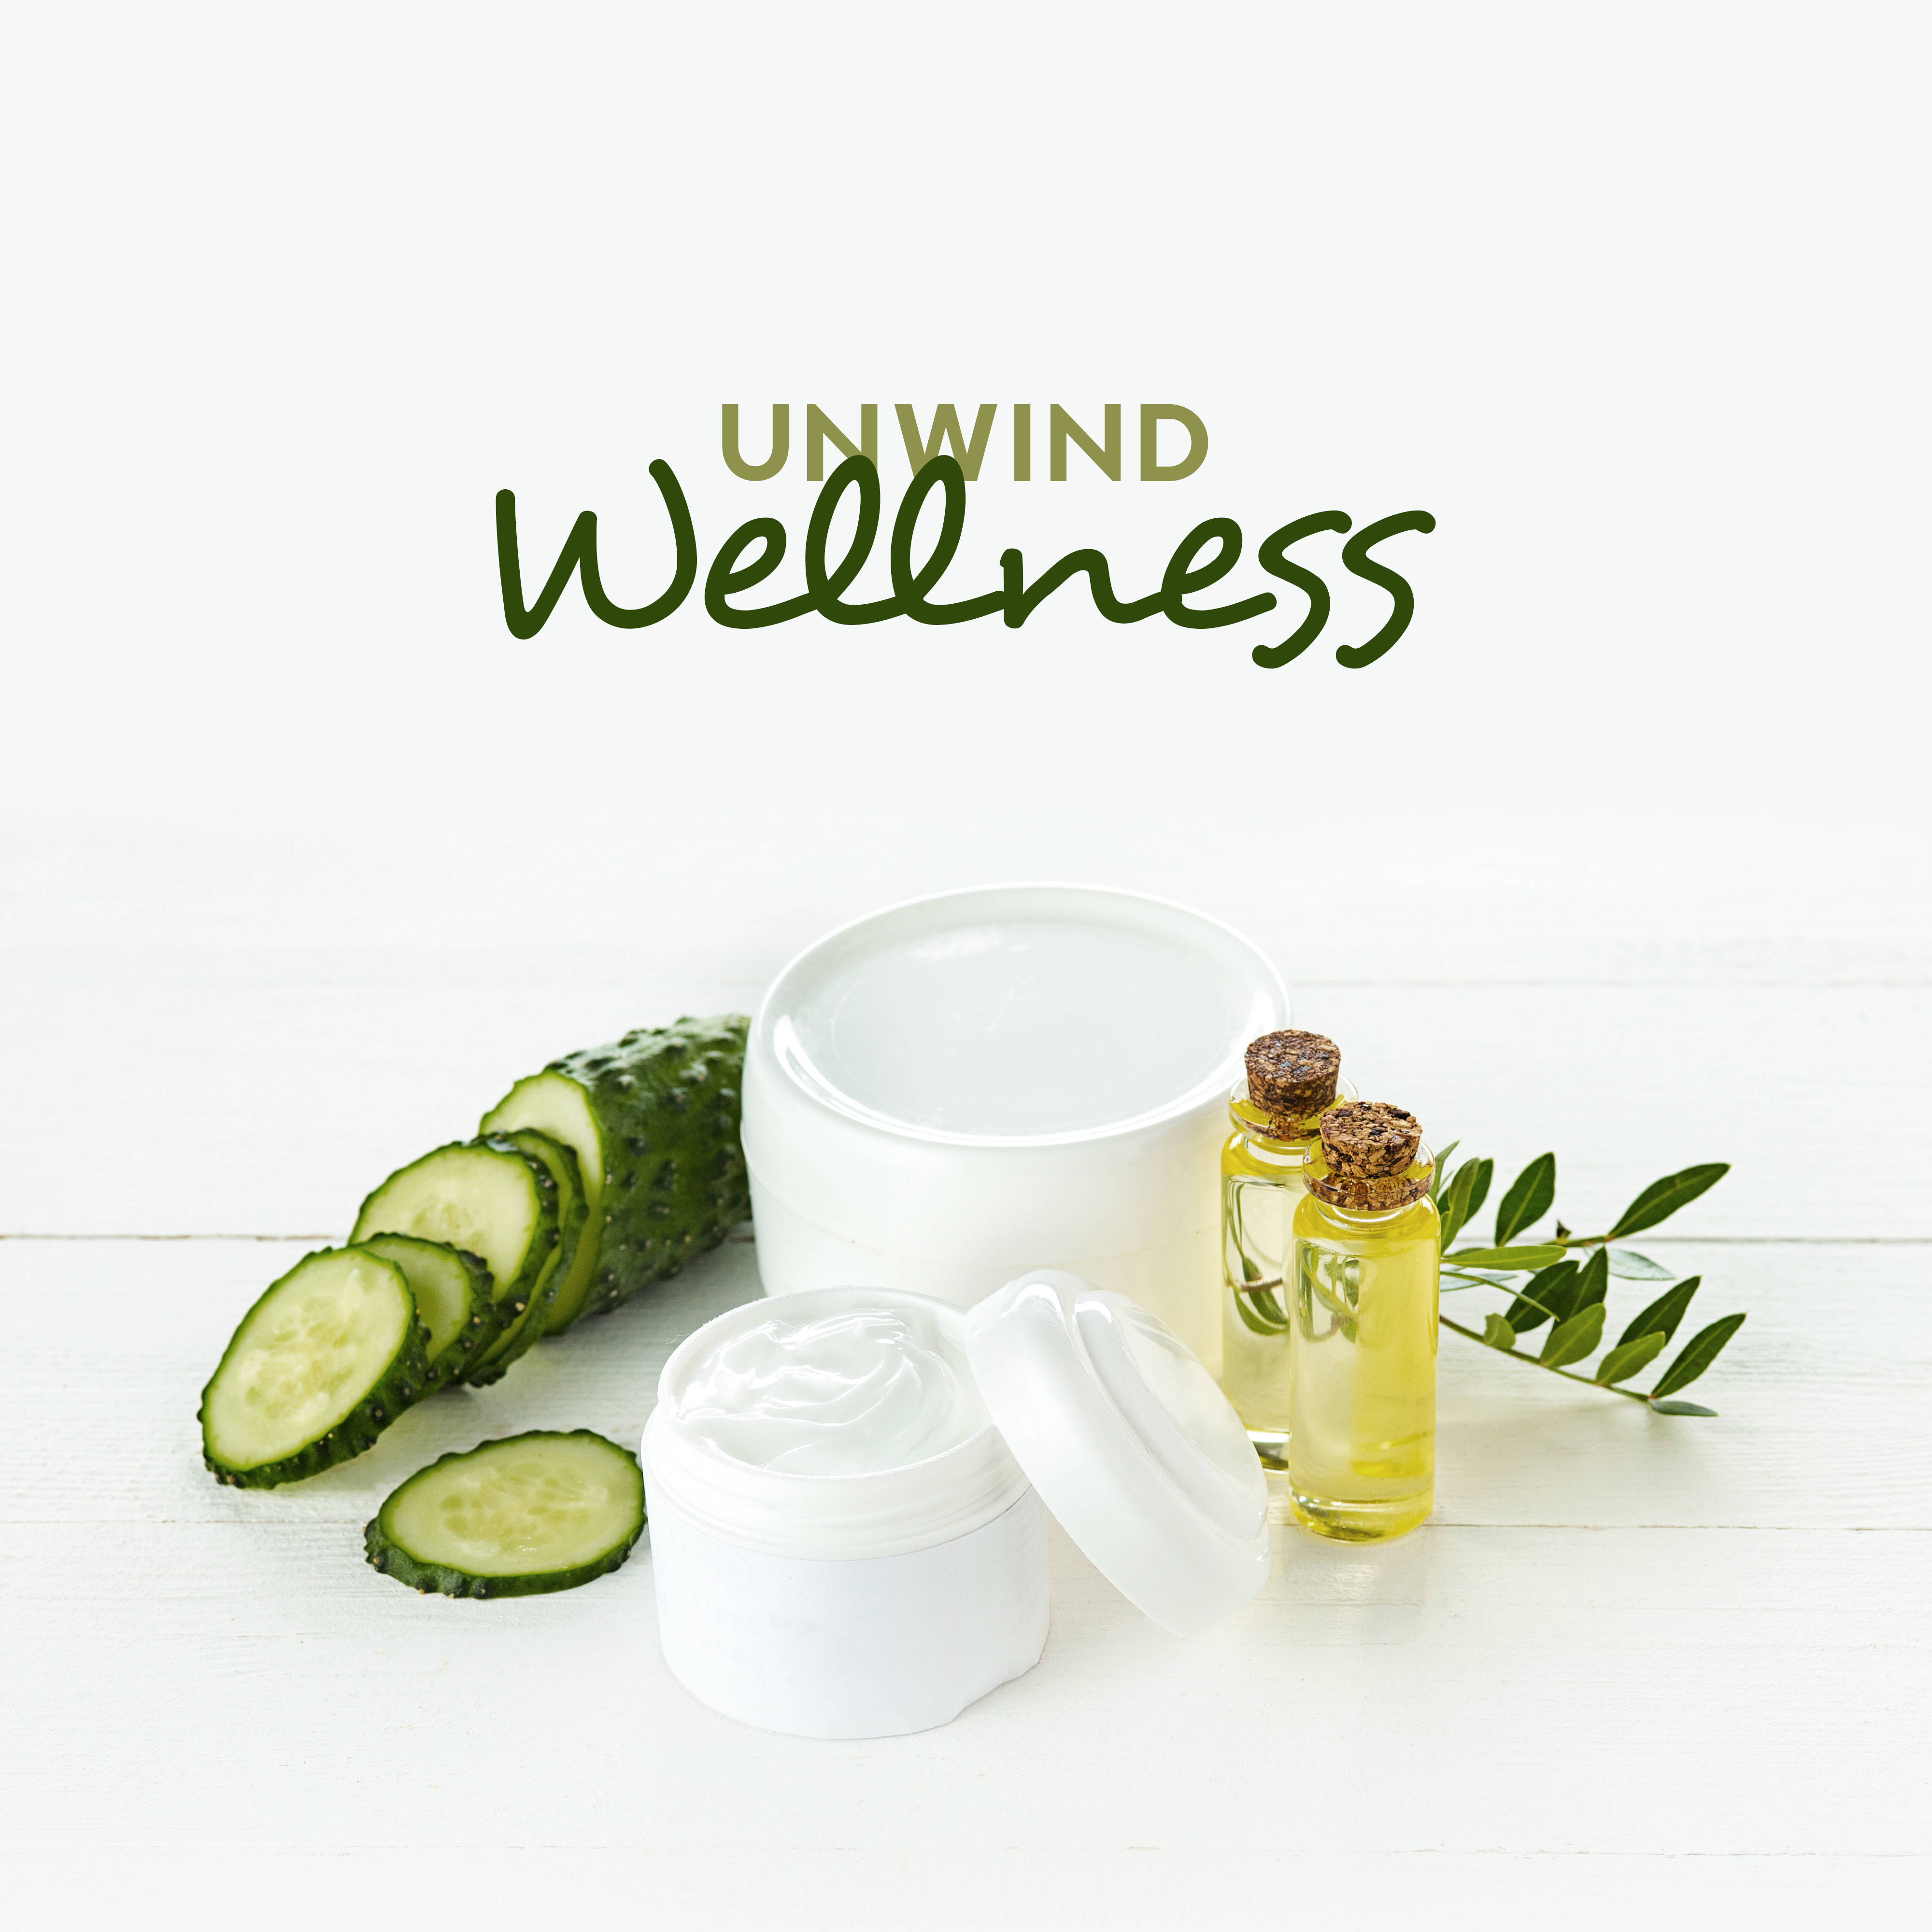 Unwind Wellness - Music for Spa, Massage, Therapy and Treatments for Your Beauty and Health